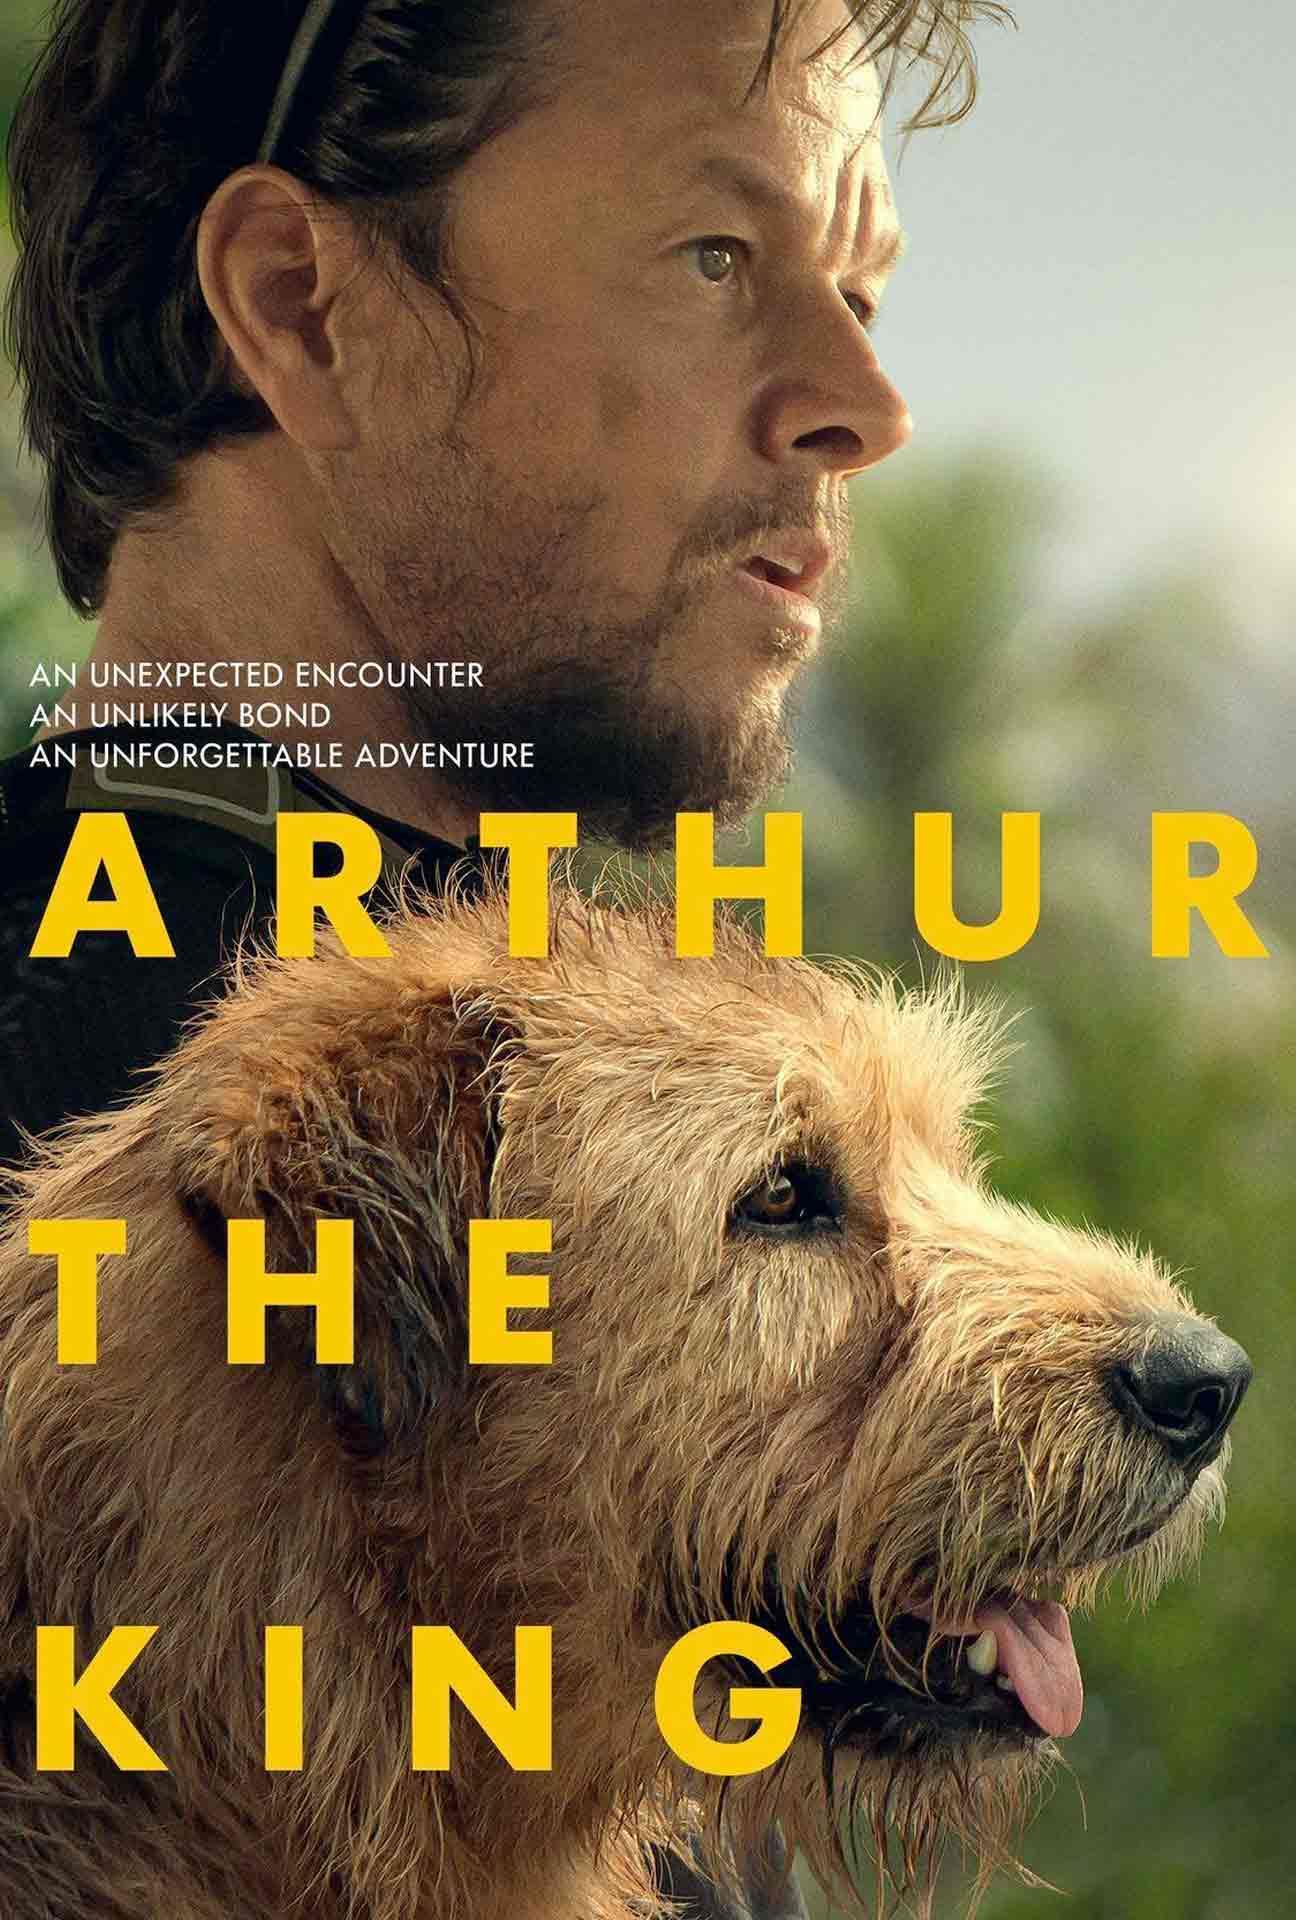 Movie Poster for Arthur The King